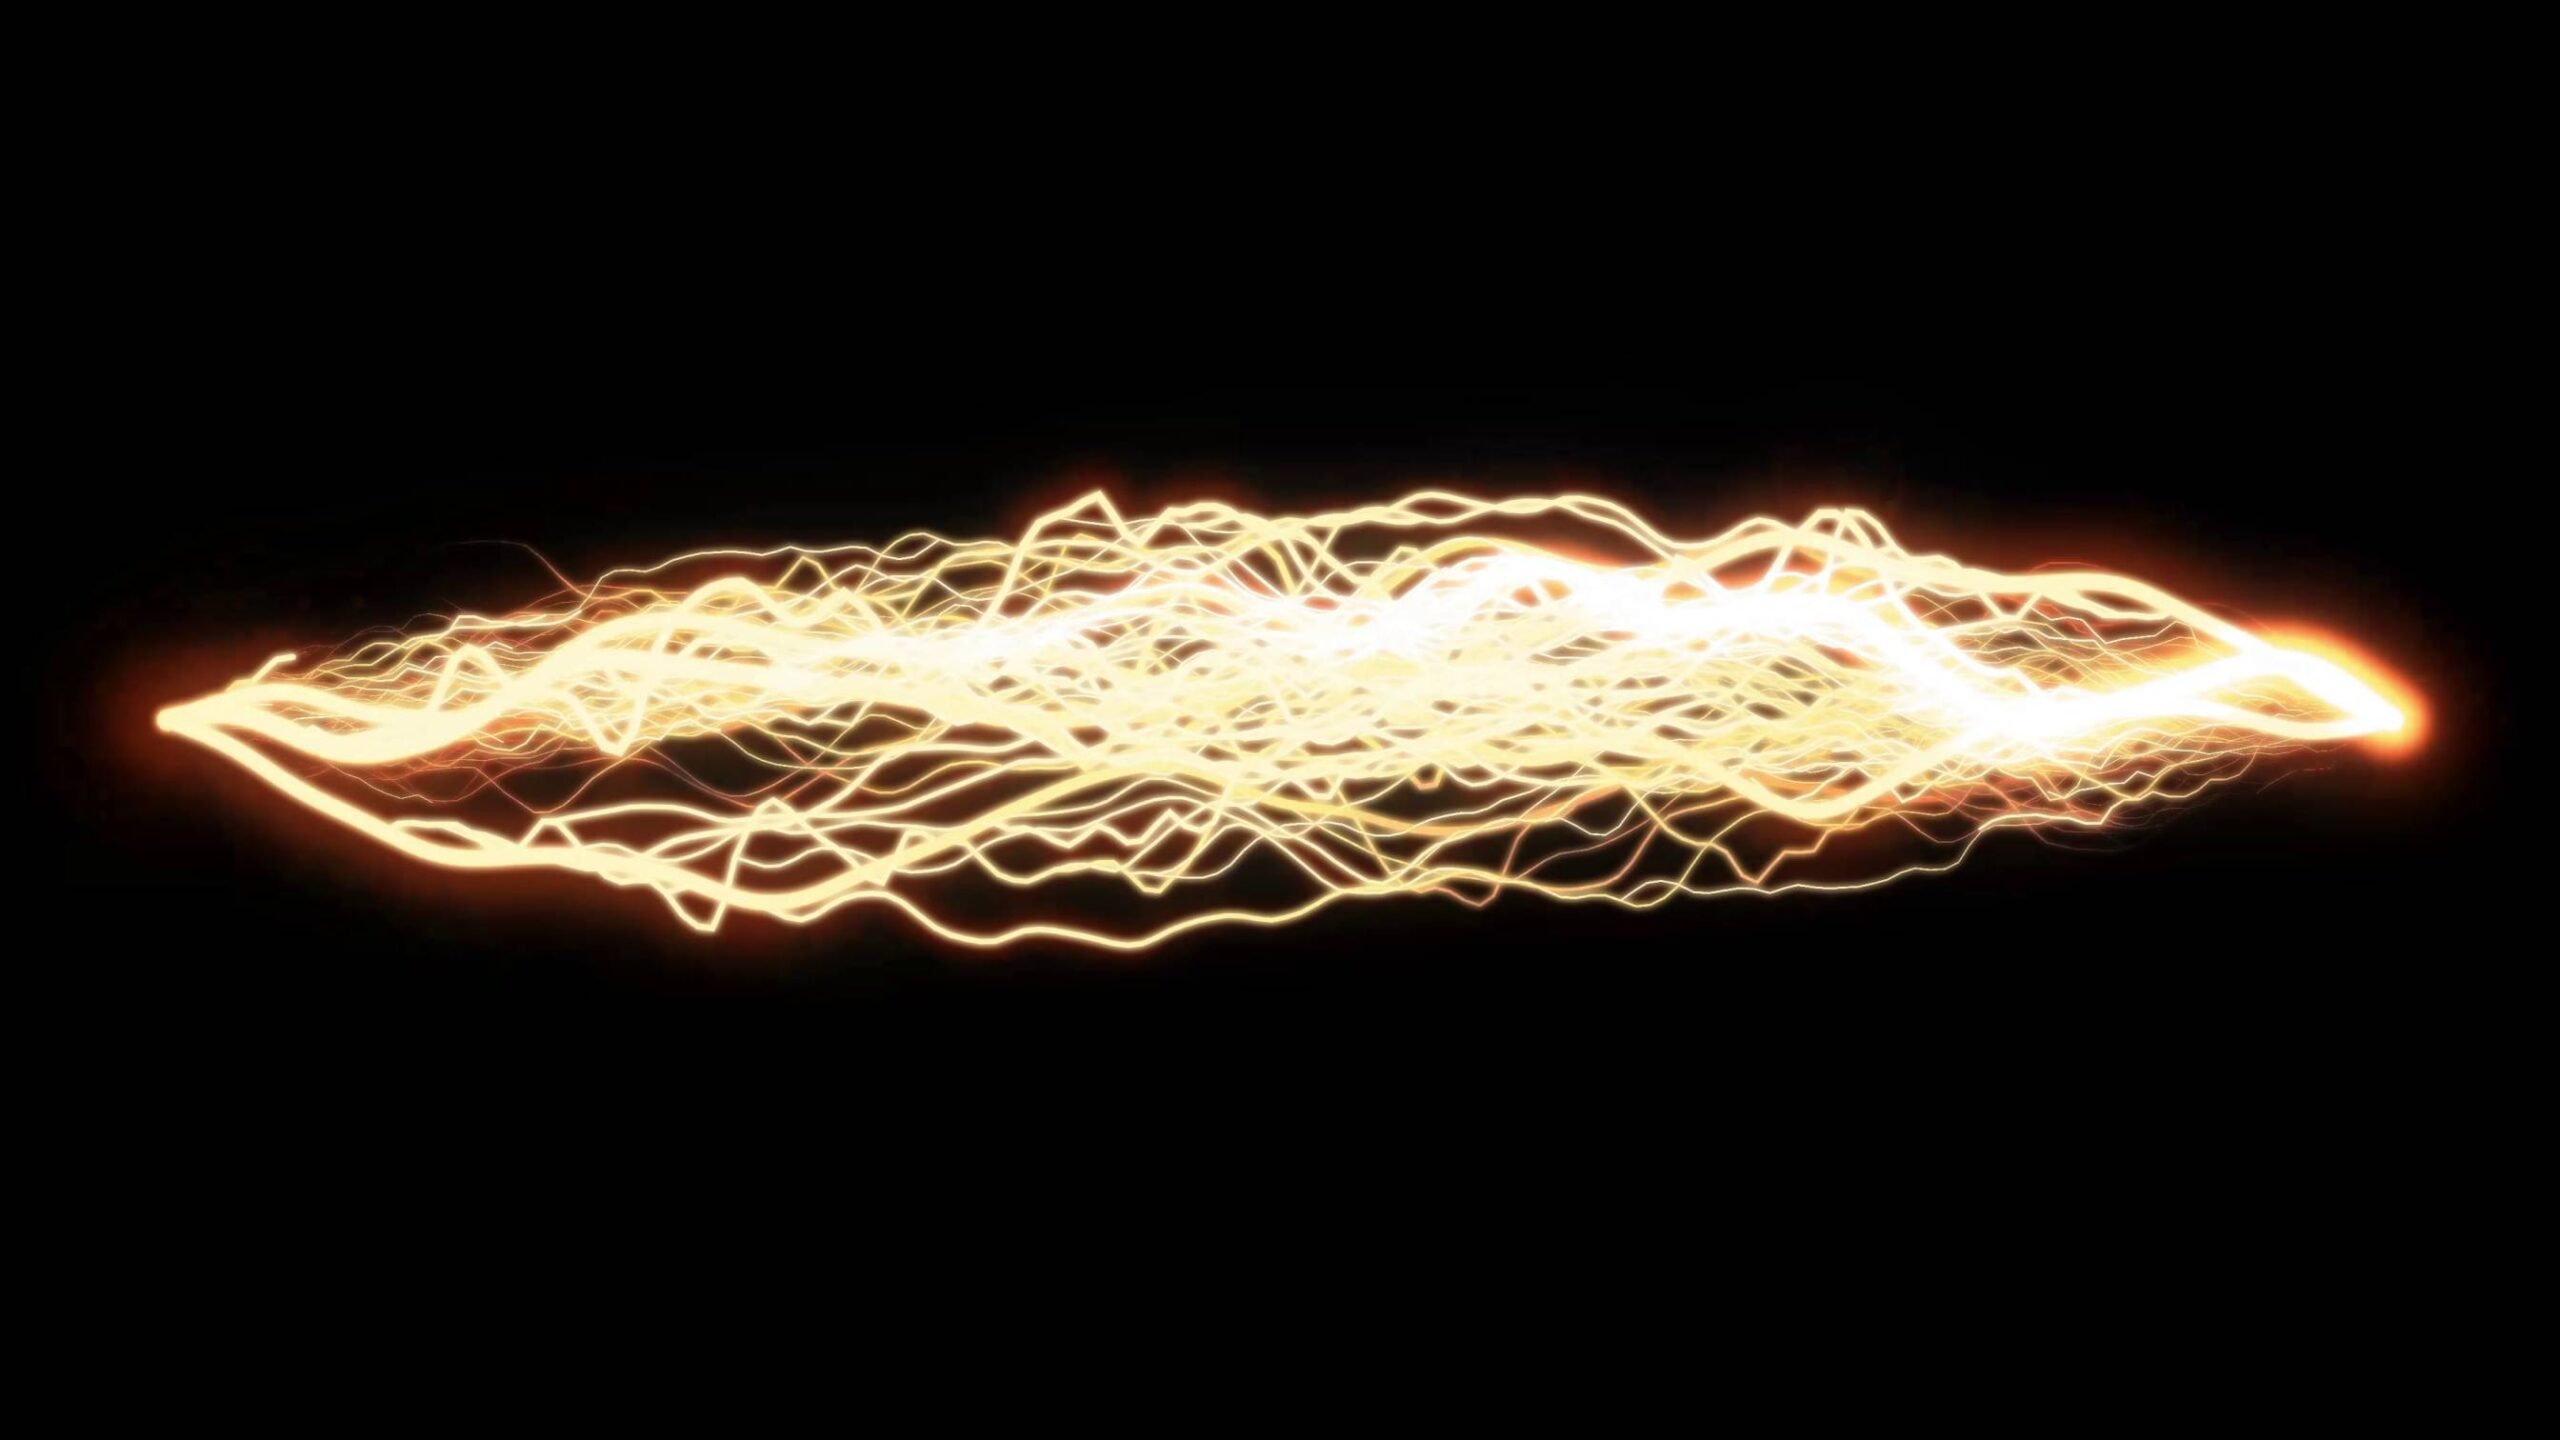 4K Electricity Overlay Effect Free Download || Overlay Effect For Editing